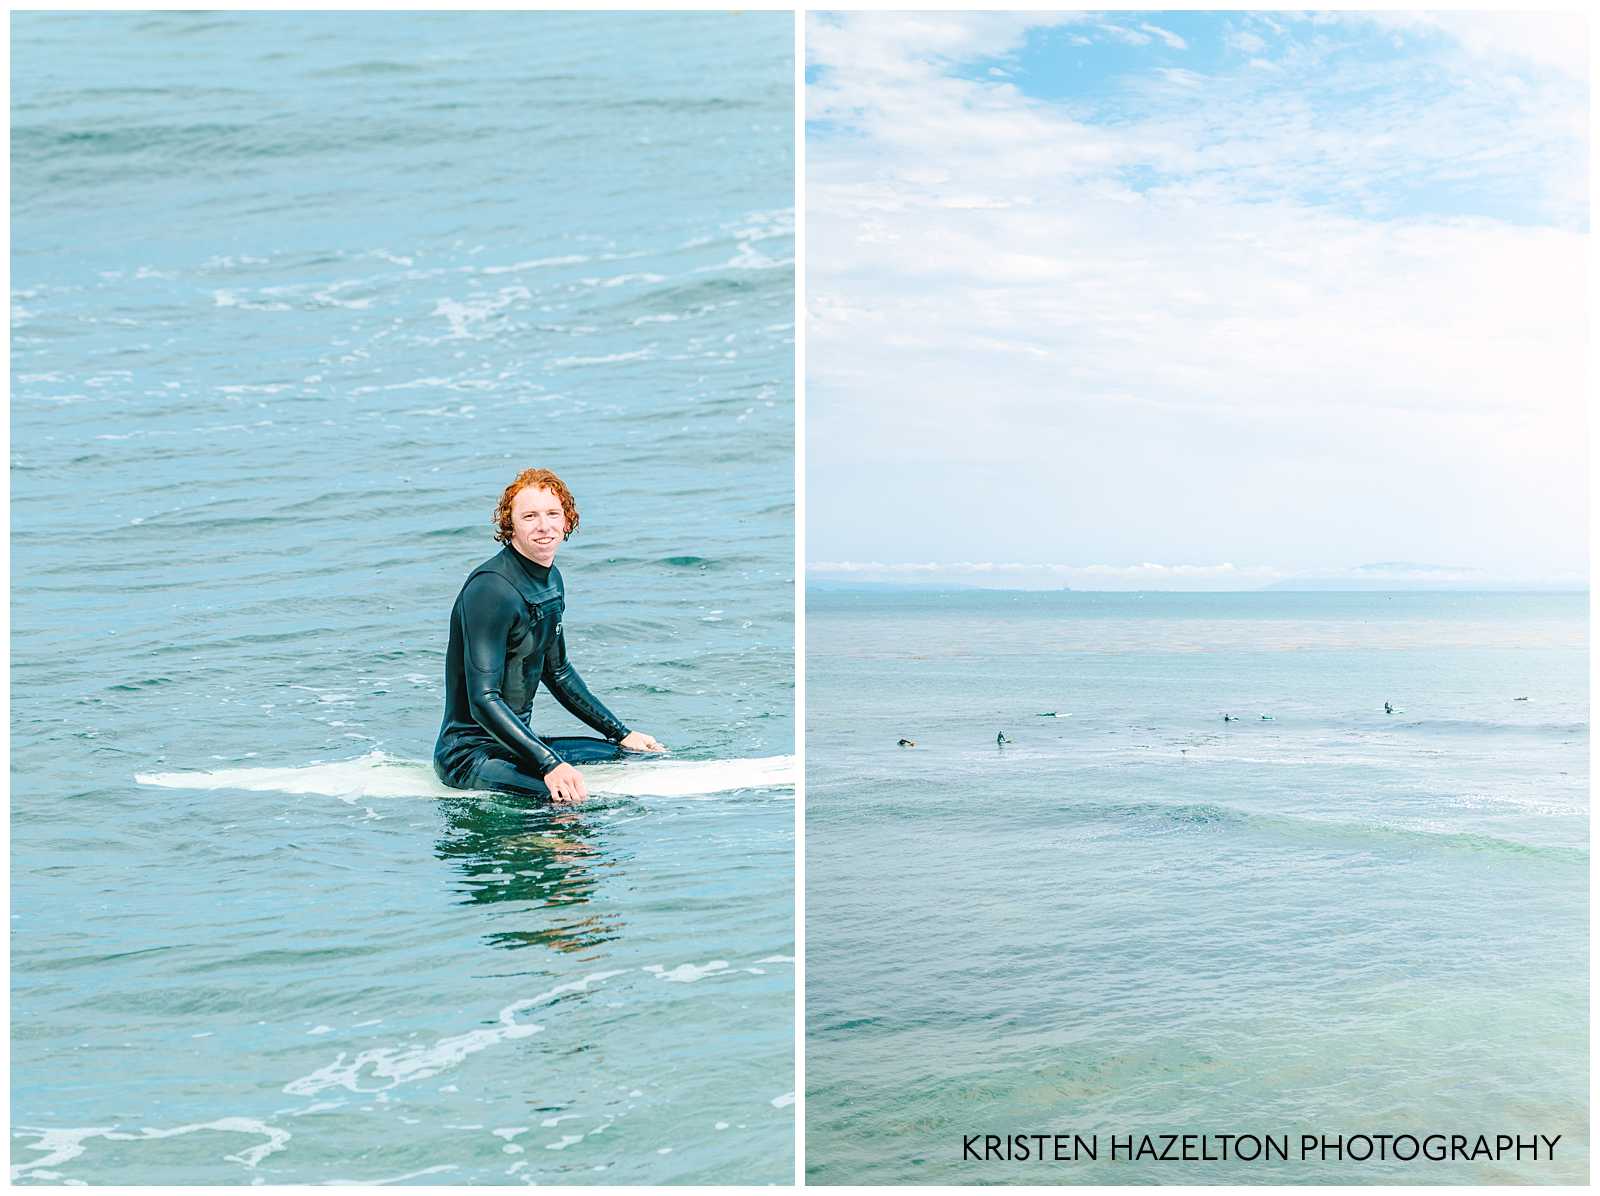 Redheaded man wearing a wetsuit, sitting on a white surfboard in the ocean. Surfing photography by Kristen Hazelton.